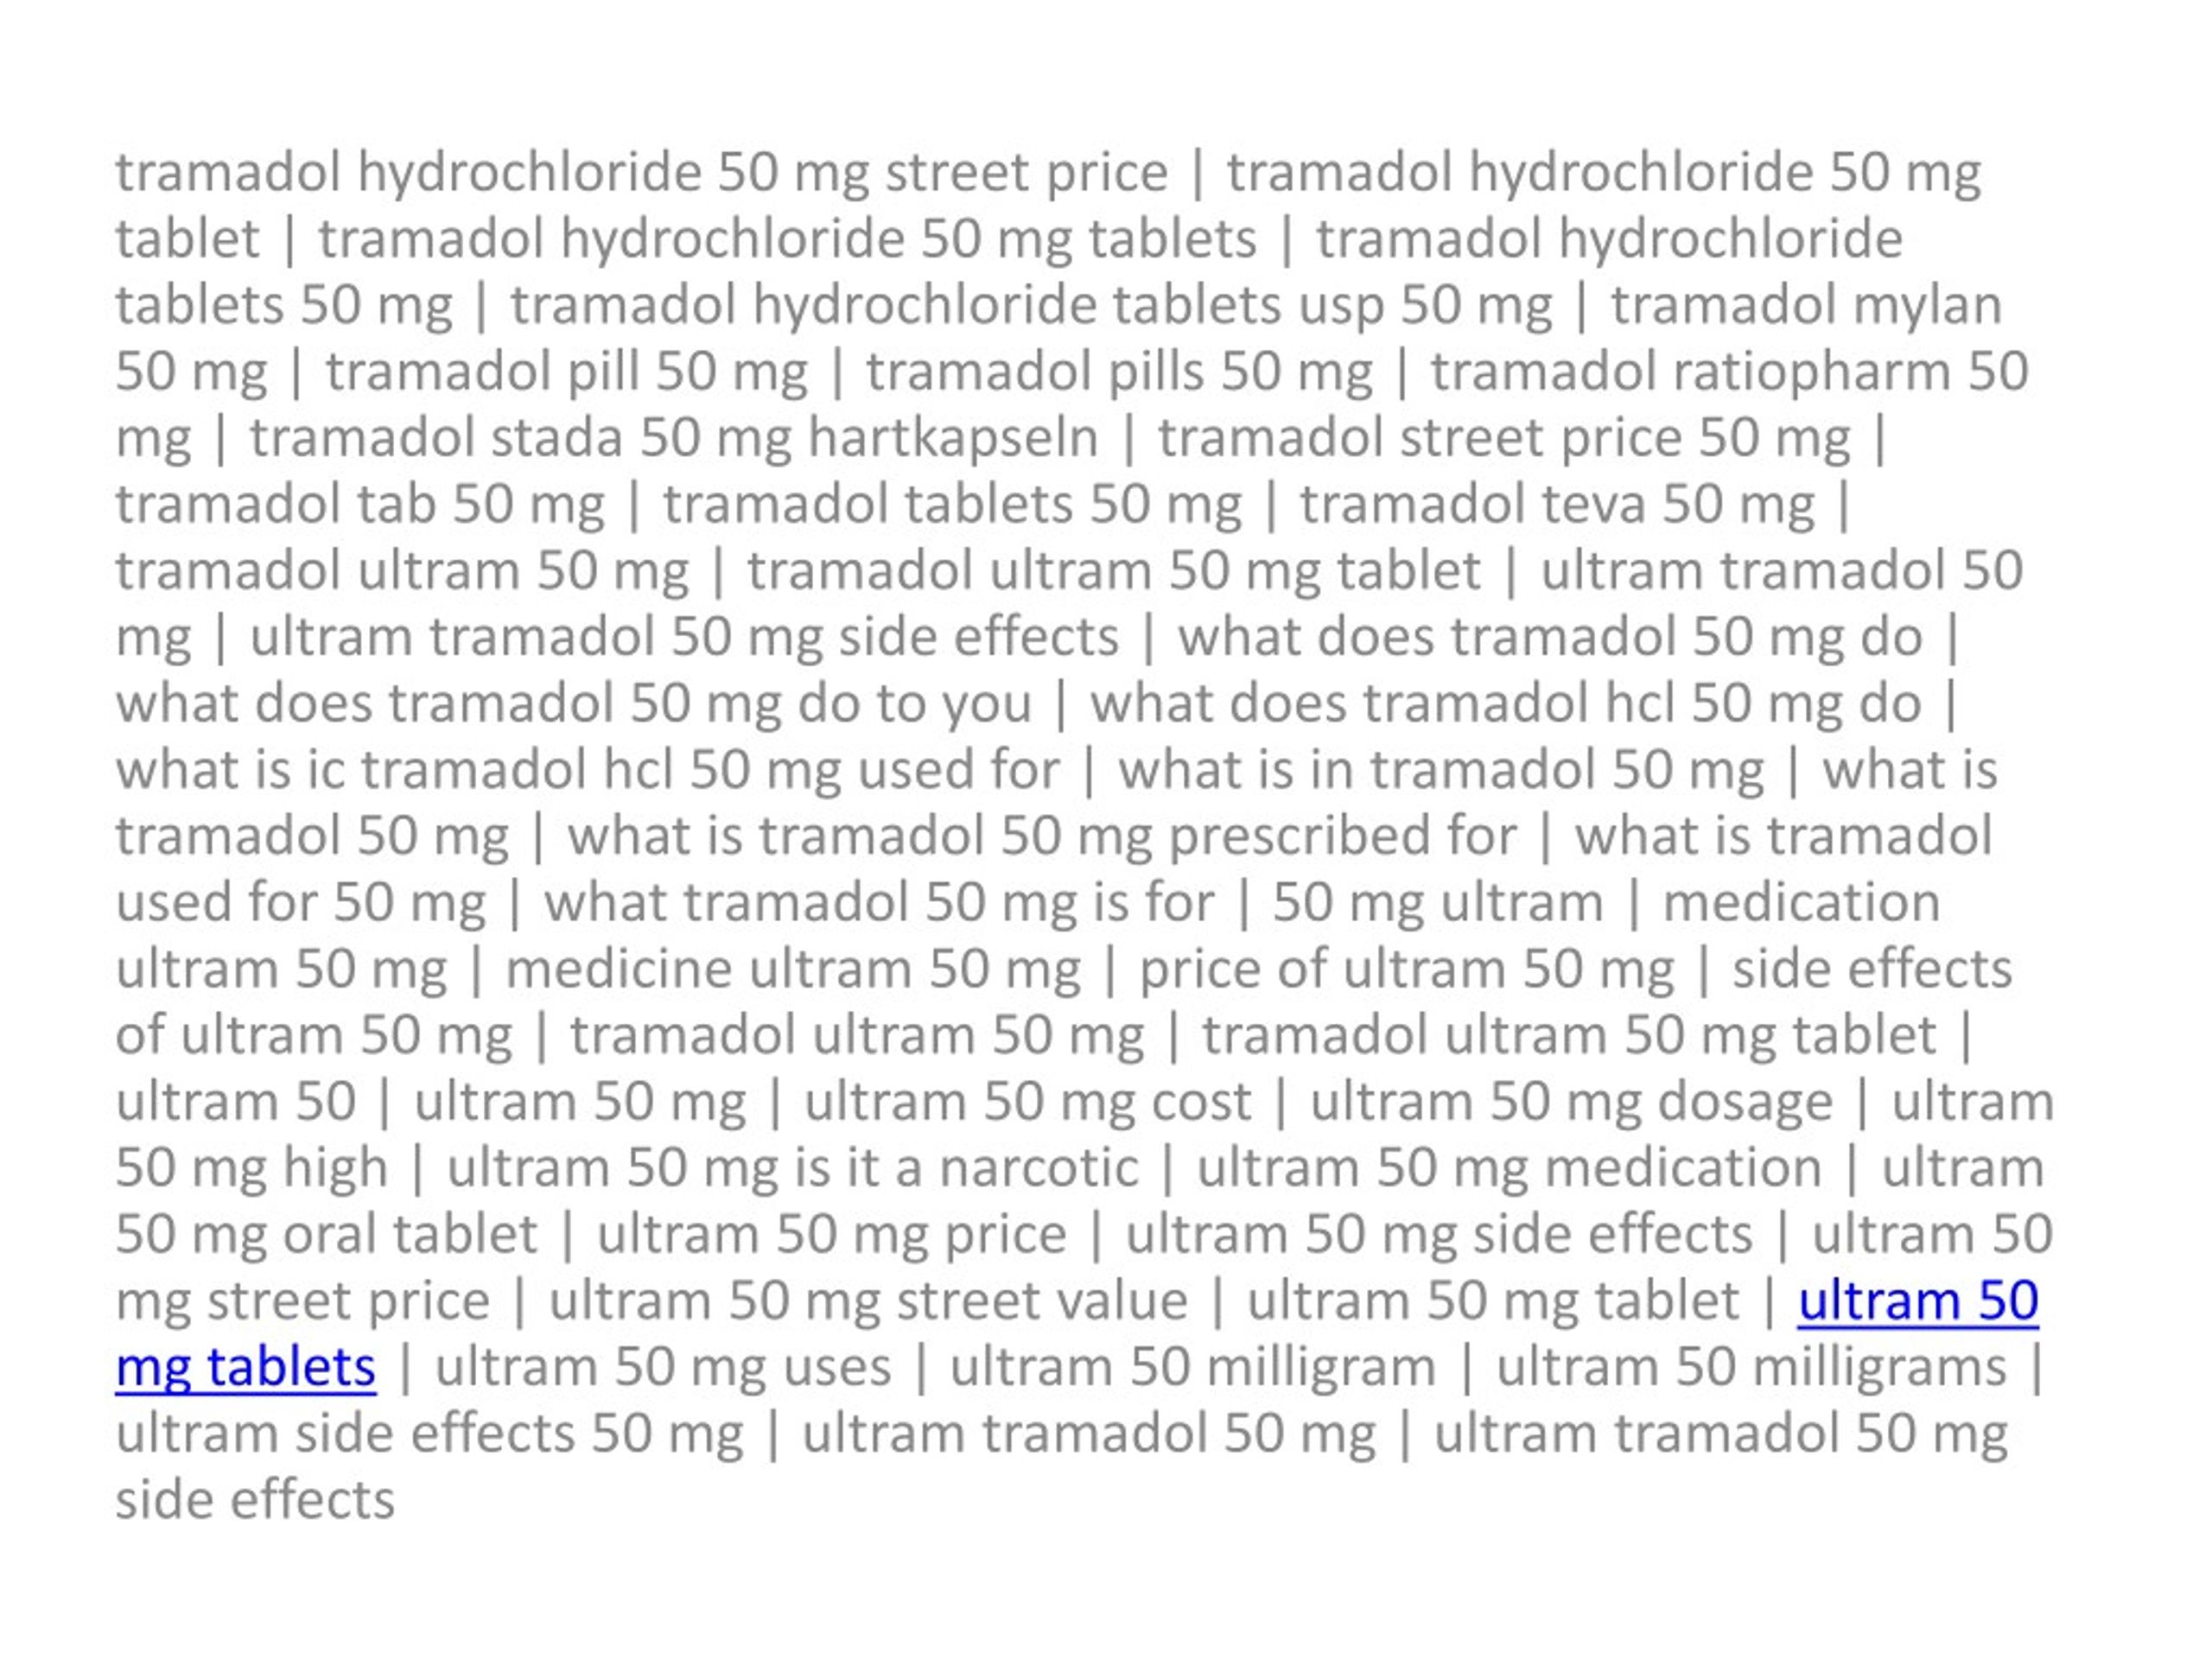 Tramadol hcl 50 mg cost